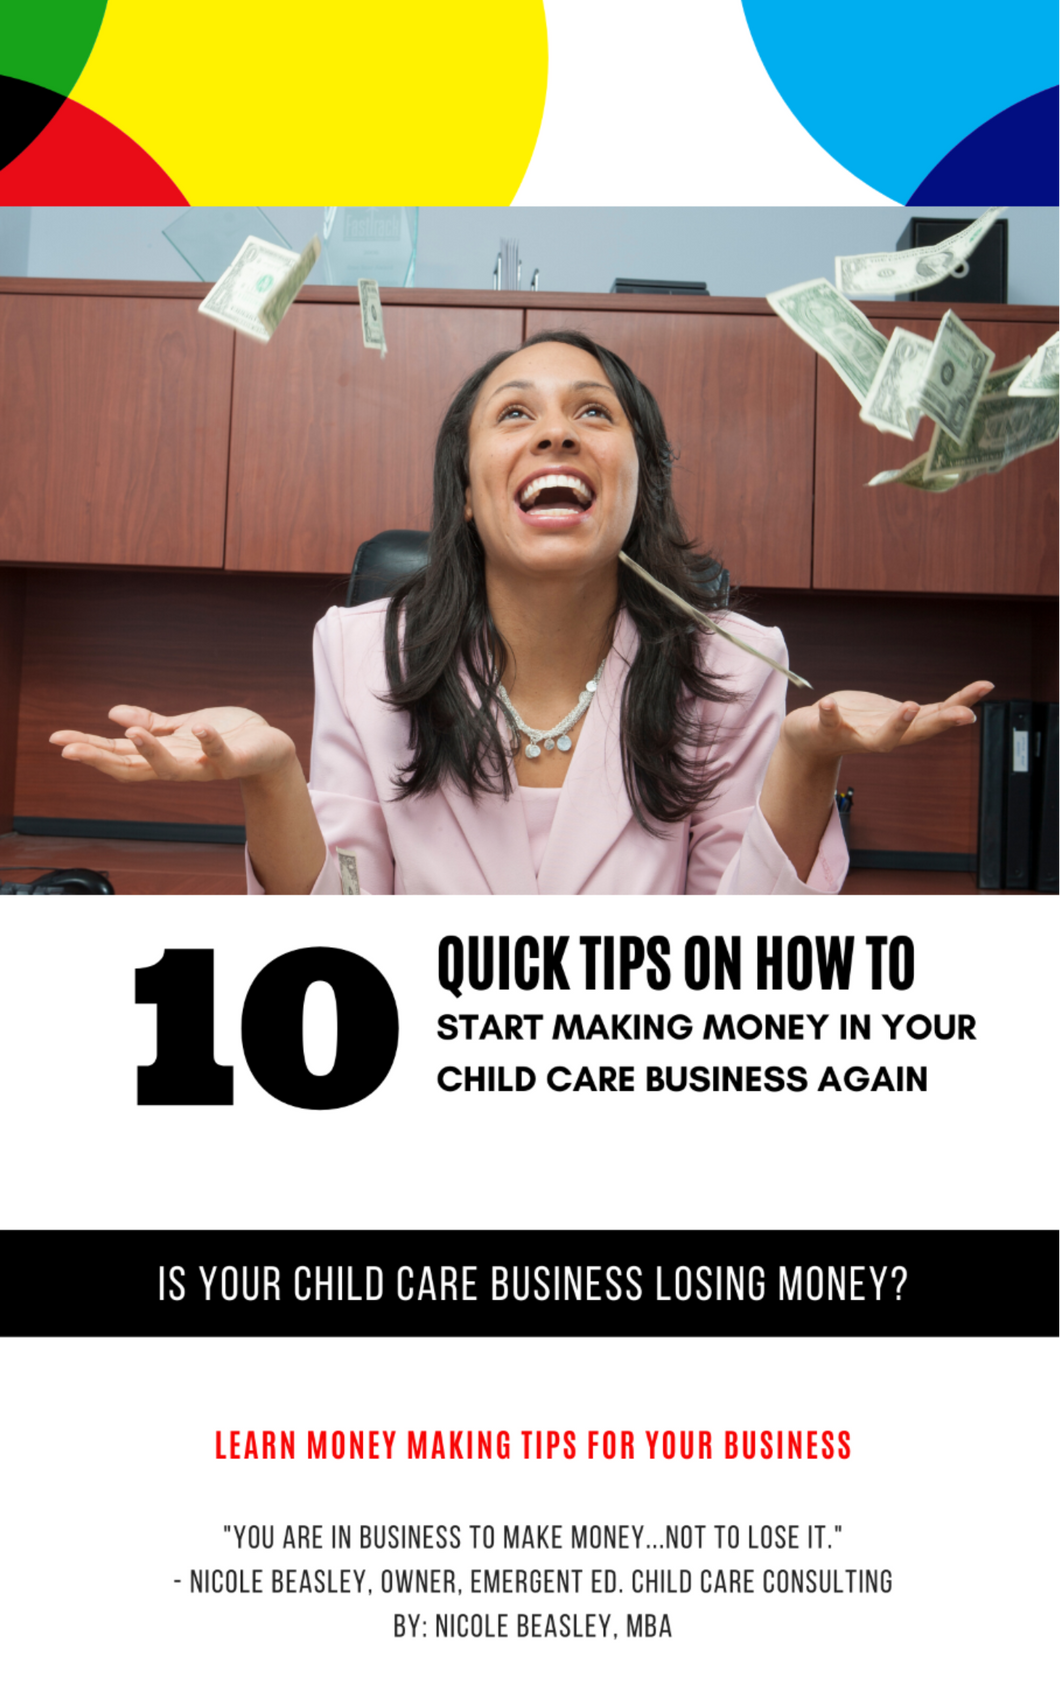 10 Quick Tips: How to Make Money in Your Child Care Business Again